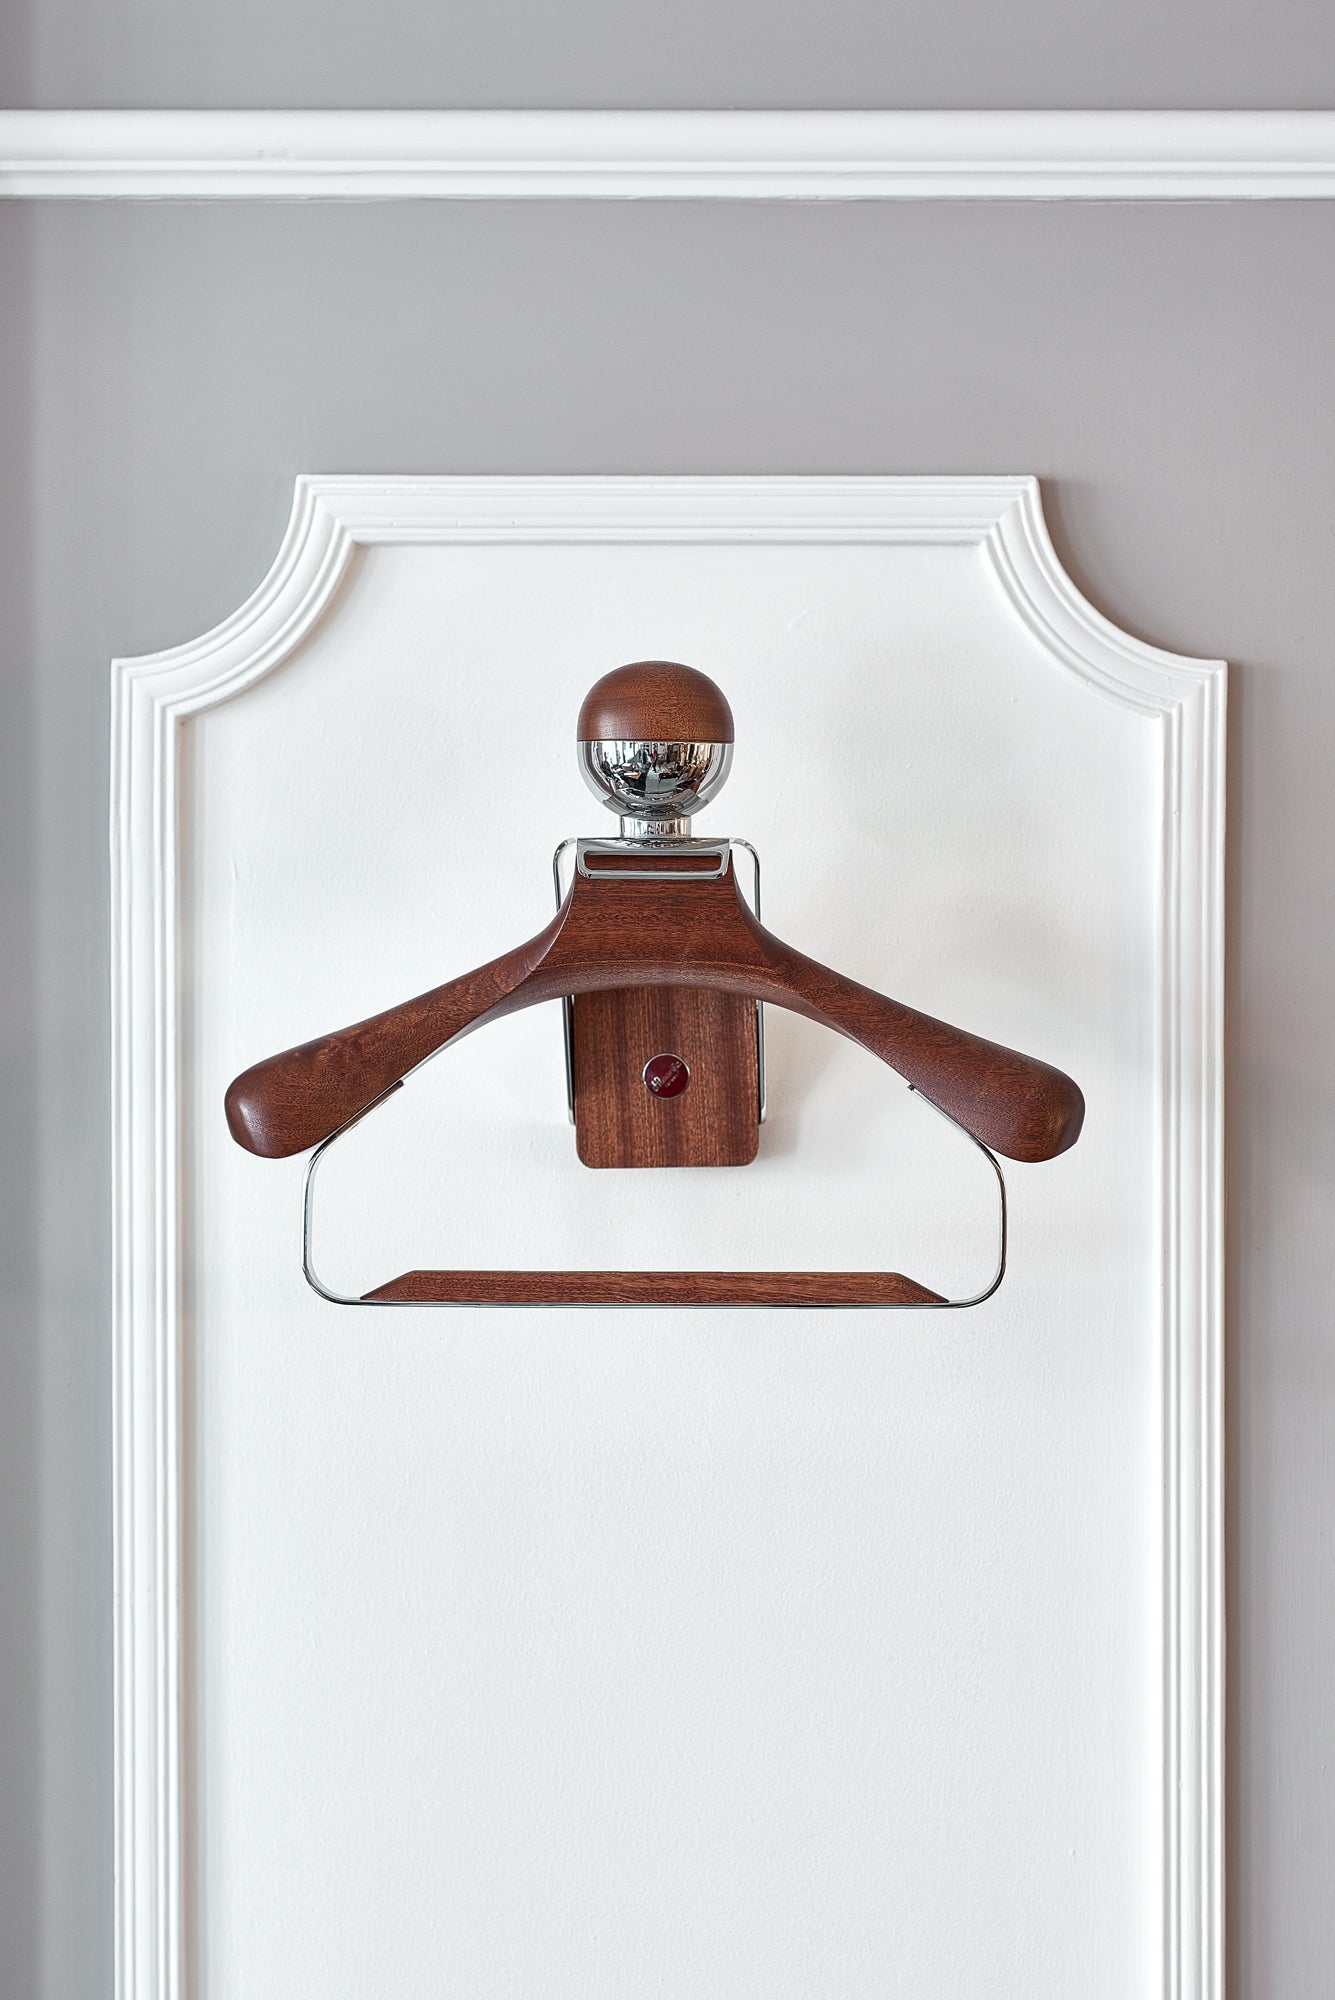 The Wall Mounted Valet